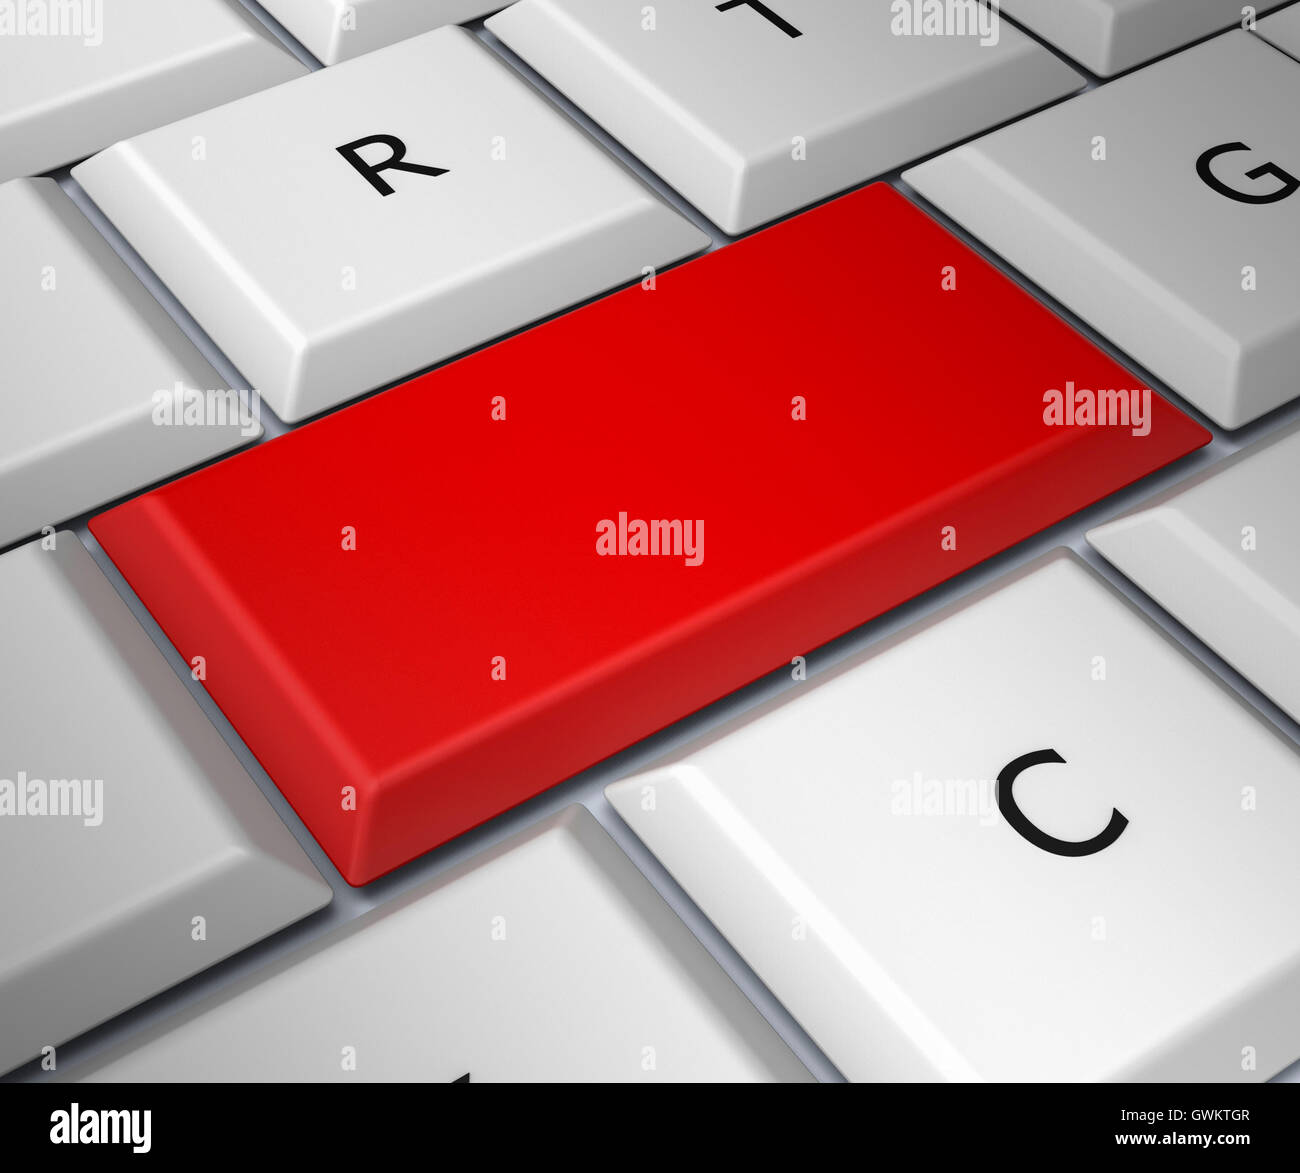 Blank Computer Keyboard Key Shows Red Empty Copyspace Online Stock Photo